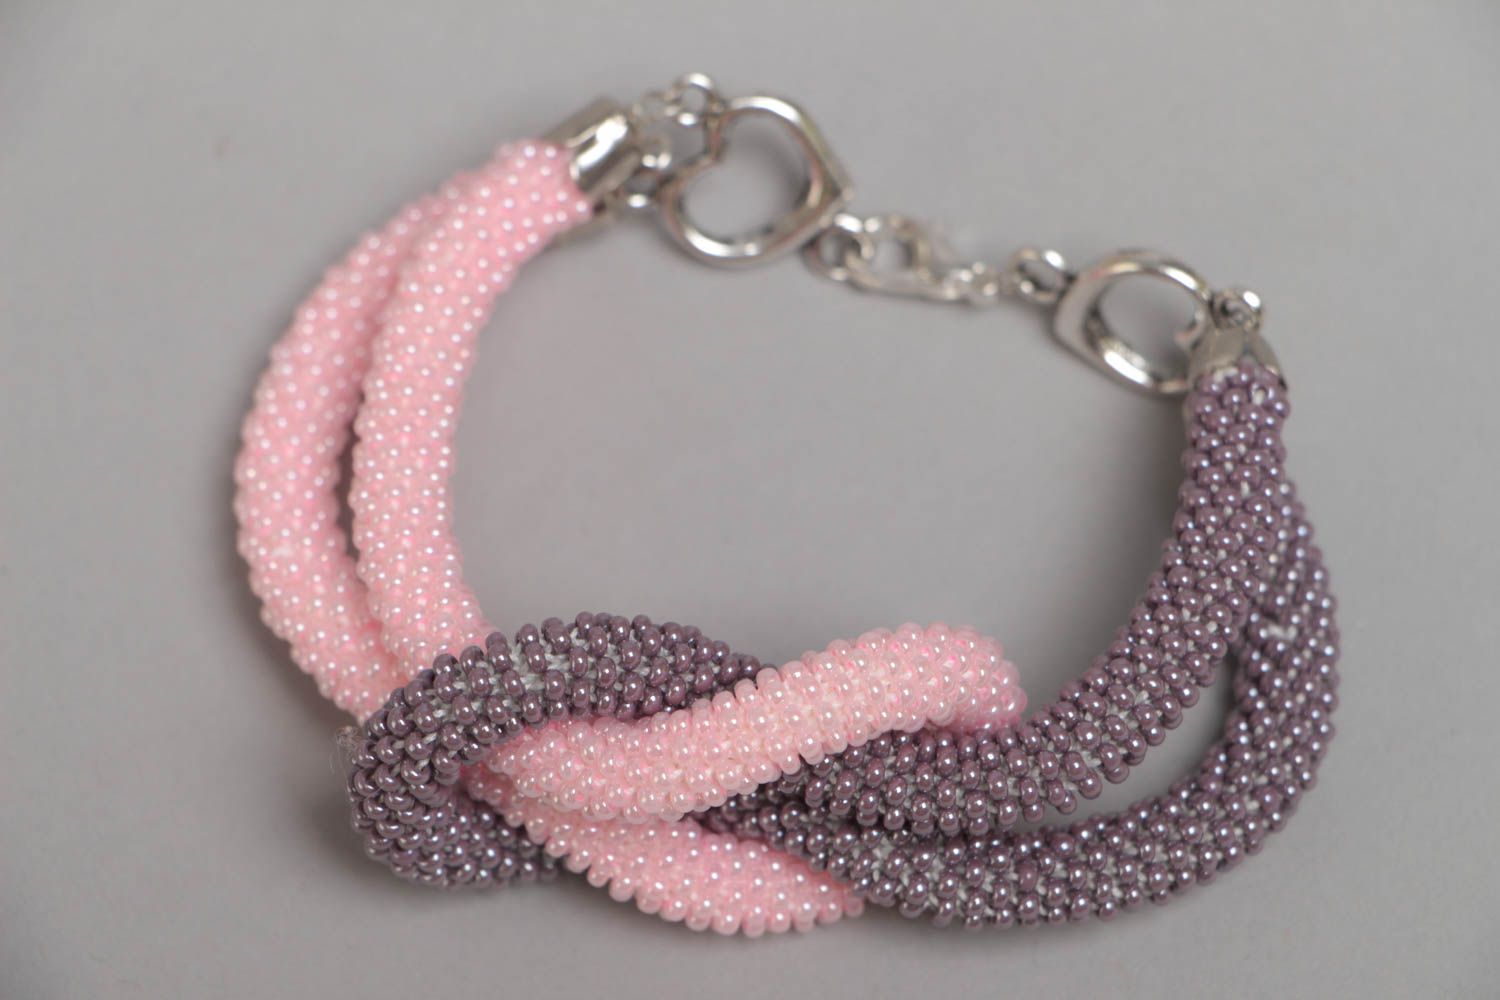 Handmade designer two colored gray and pink beaded cord wrist bracelet for women photo 2